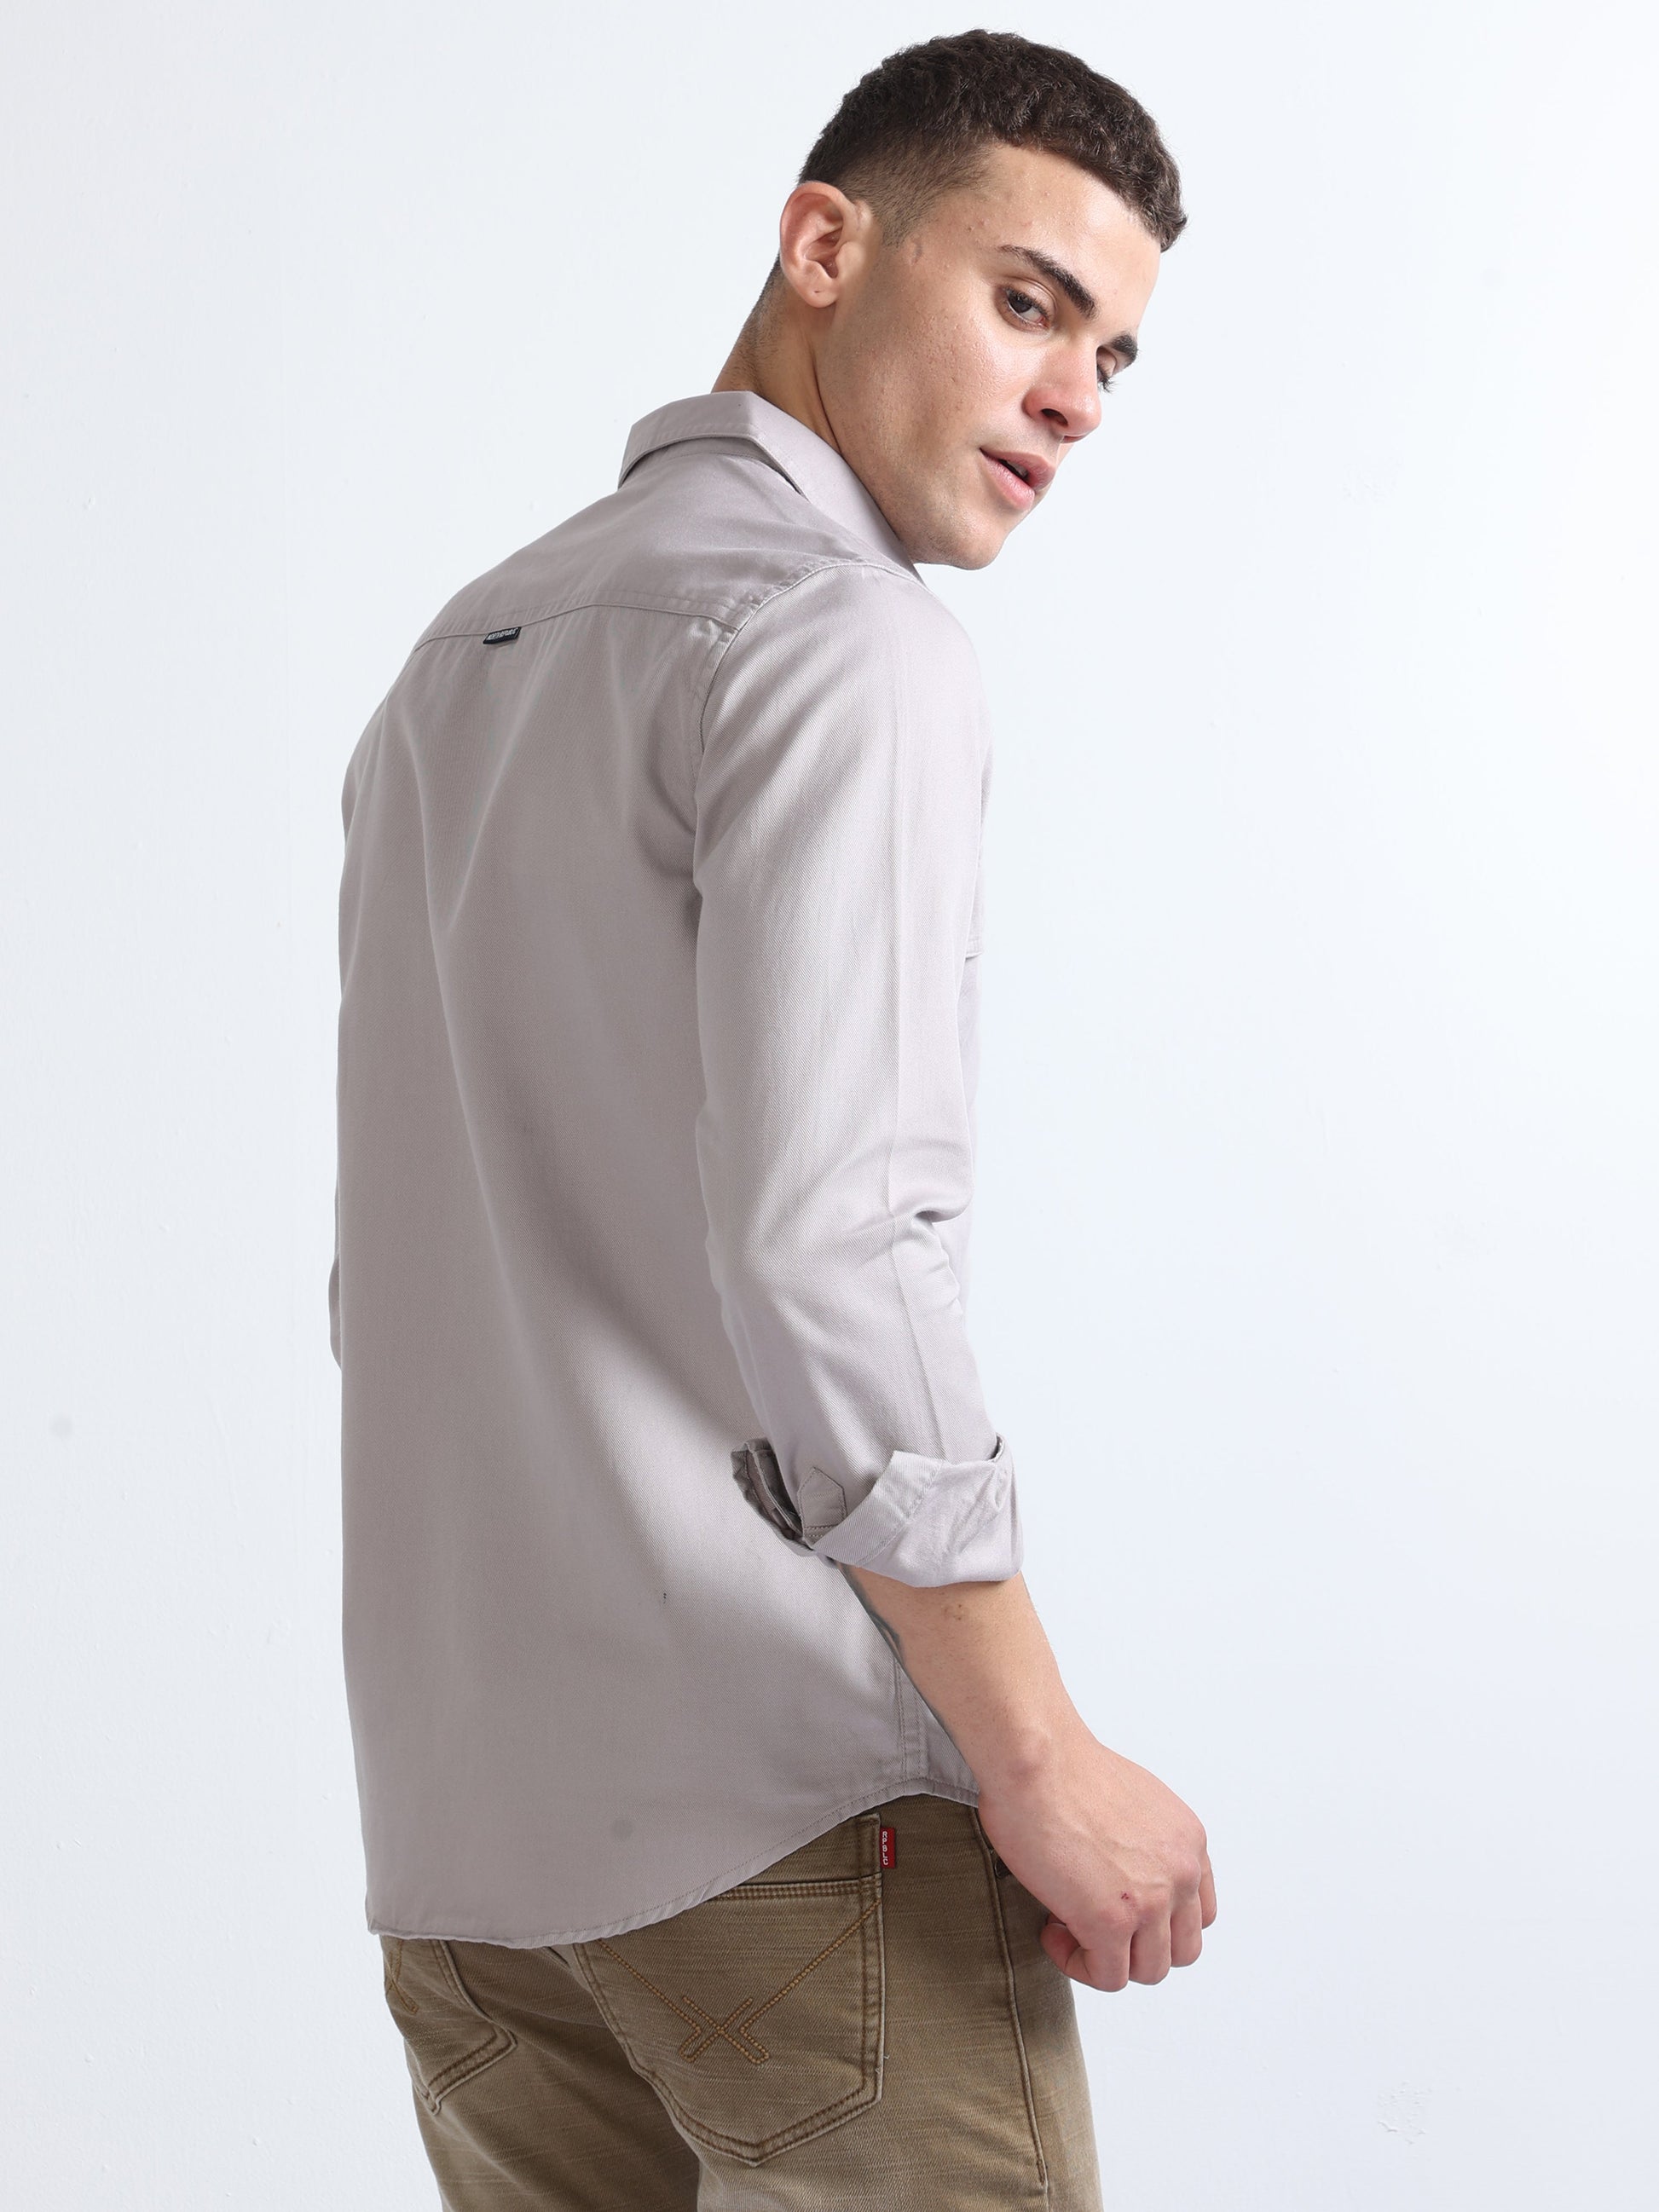 Buy Stylish And Comfort Double Pocket Twill Shirt For Mens Online.